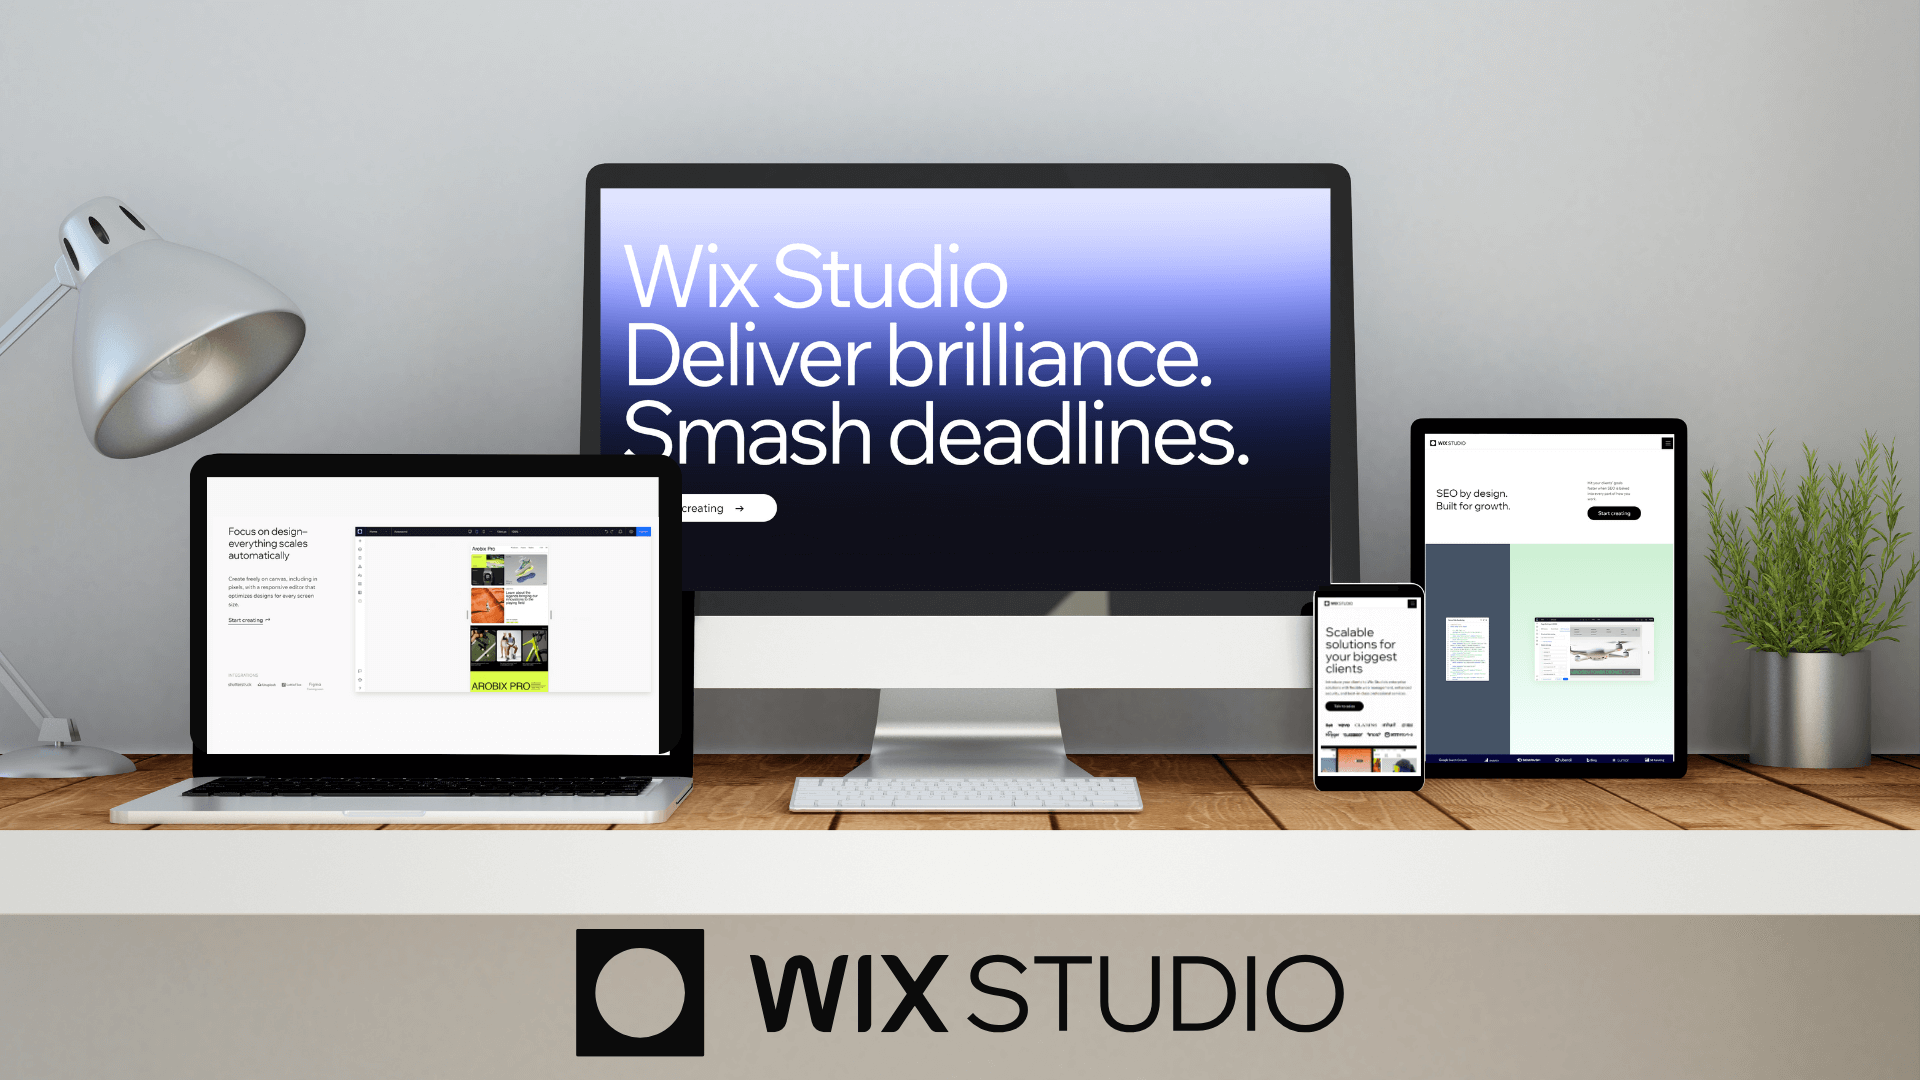 An image of different devices showing screenshots of the Wix Studio website on a desk with the Wix Studio logo below